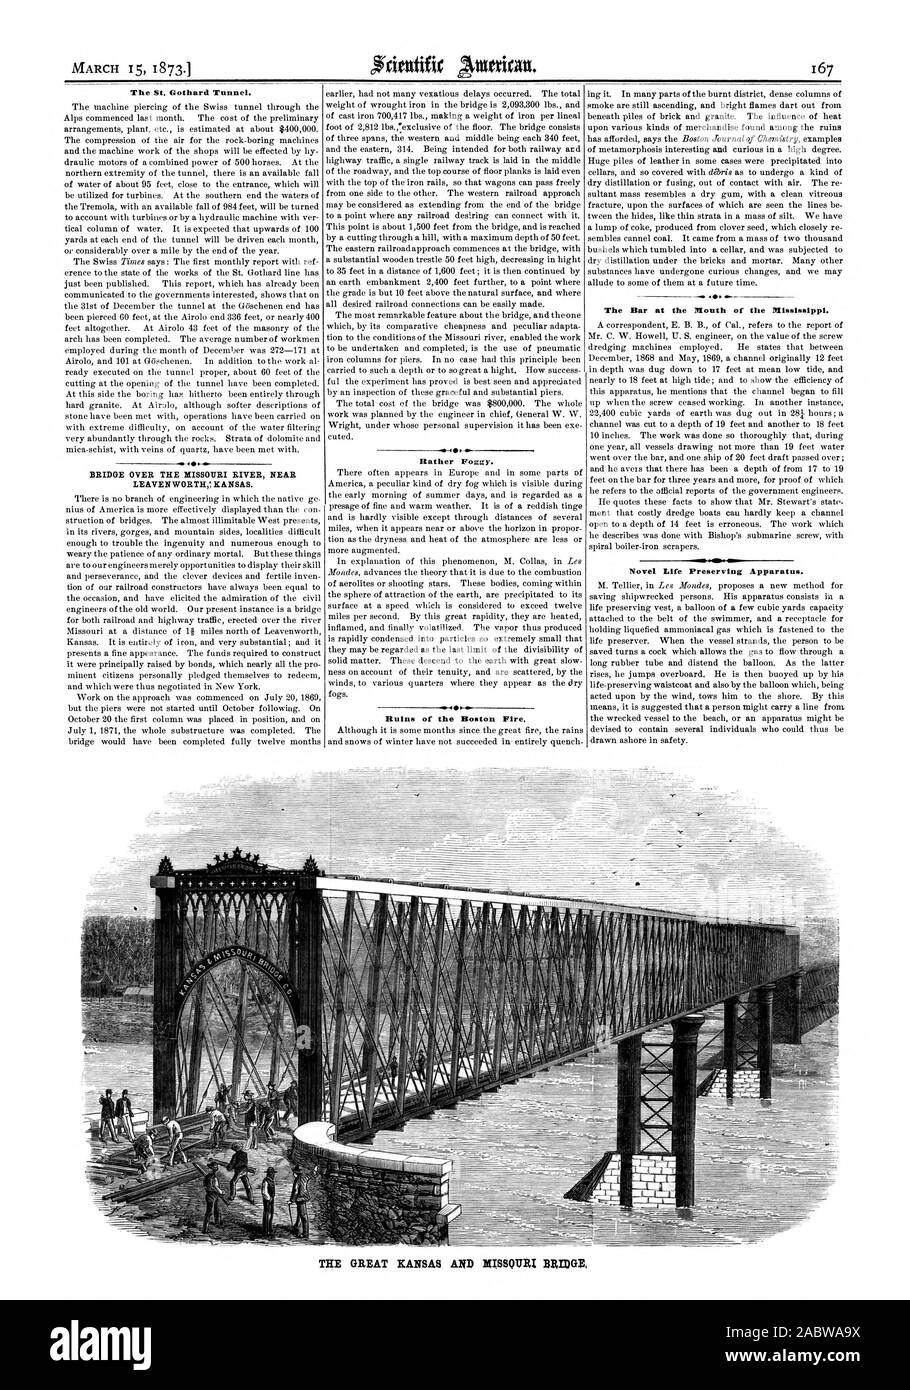 MARCH 15 18731 The St. Gothard Tunnel. BRIDGE OVER THE MISSOURI RIVER NEAR LEAVEN WORTH KANSAS. Rather Foggy. Ruins of the Boston Fire. The Bar at the Mouth of the Mississippi. Novel Life Preserving Apparatus. THE GREAT KANSAS AND SSQURI DREDGE, scientific american, 73-03-15 Stock Photo